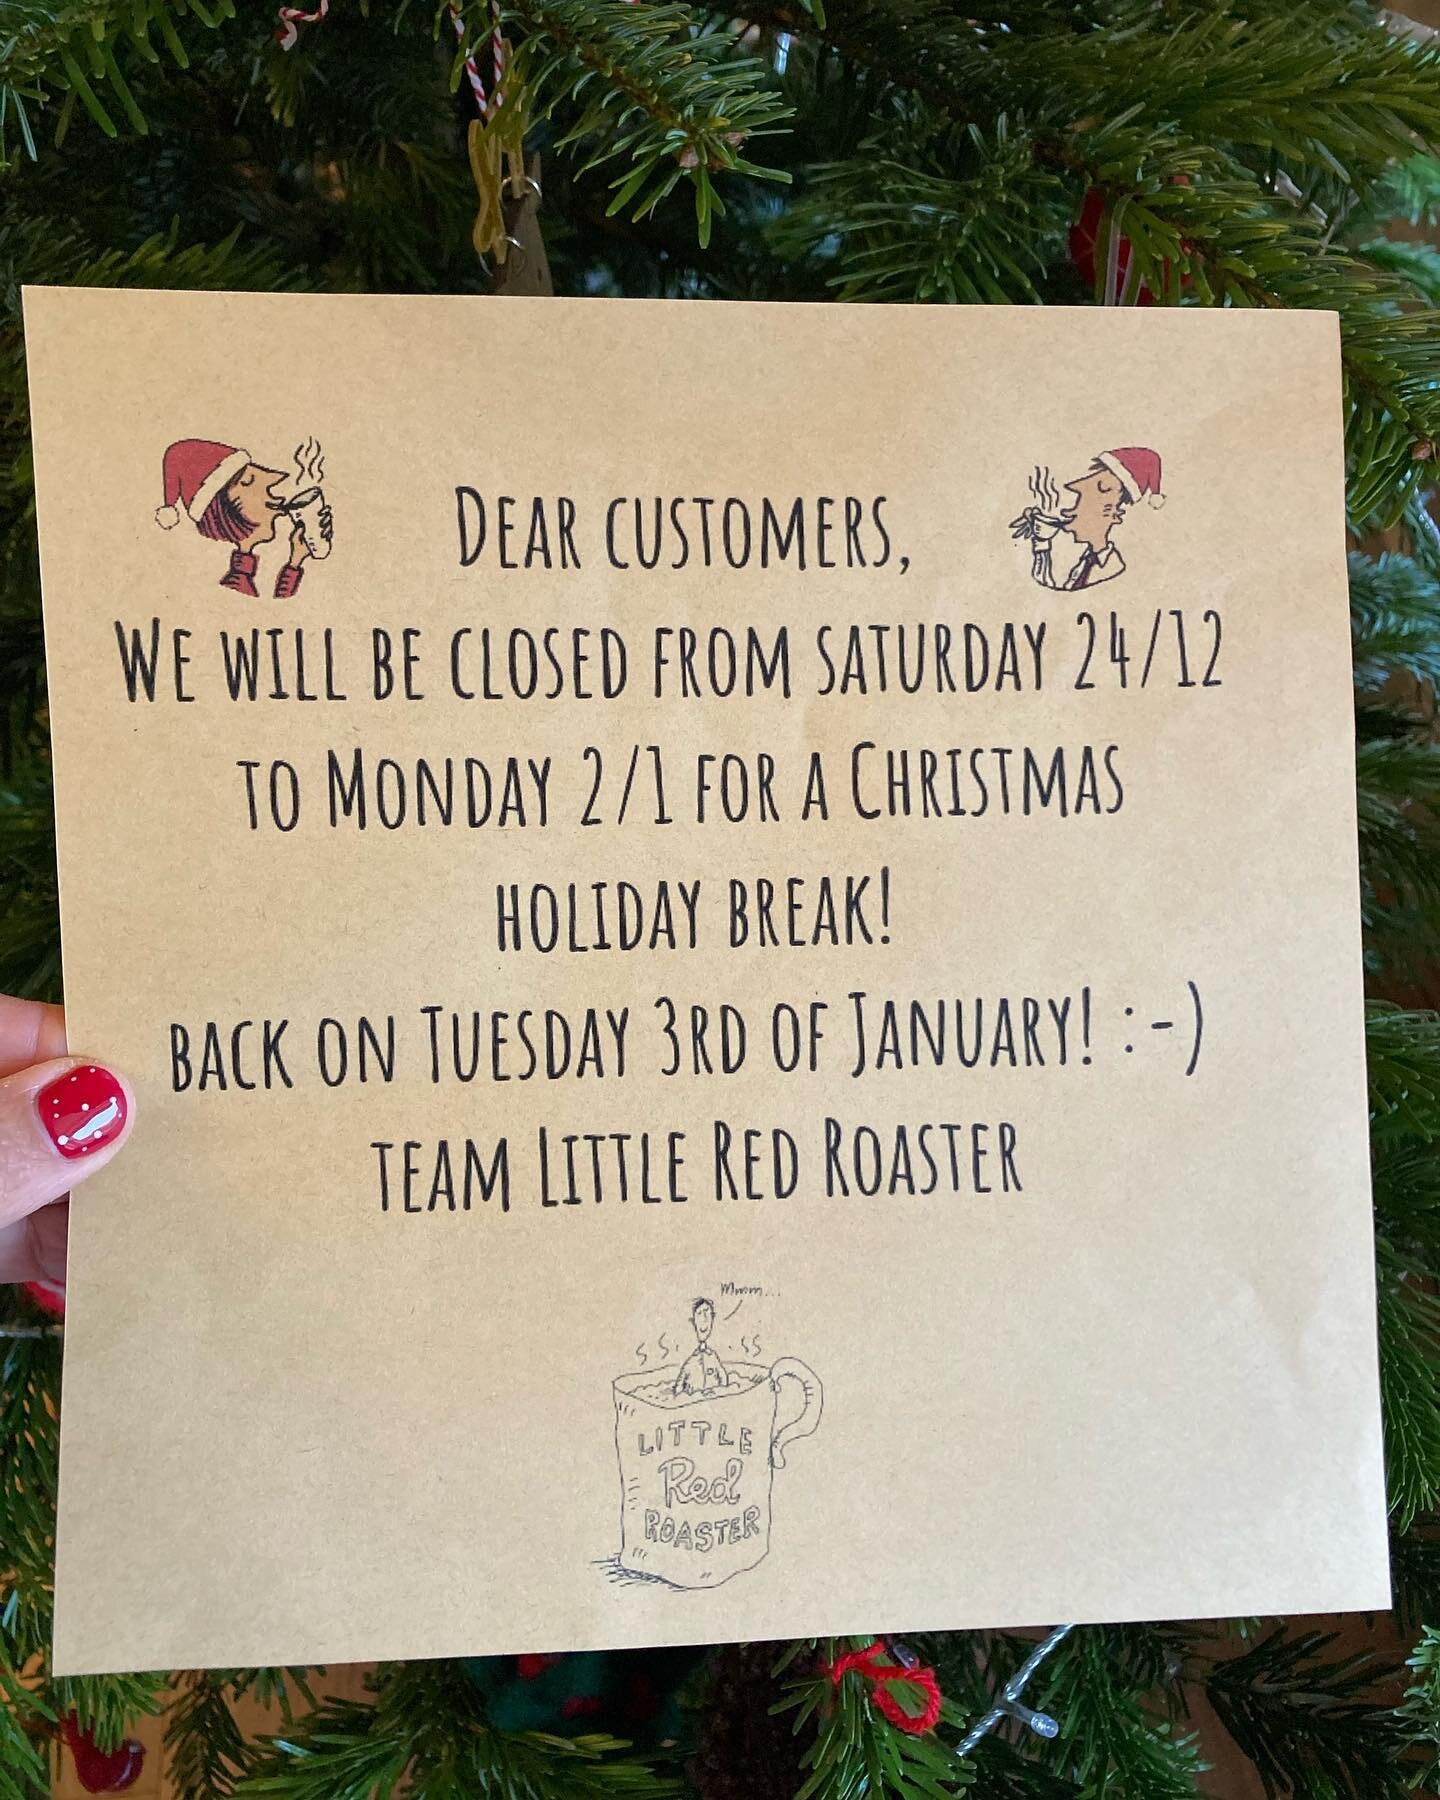 We will be open as usual until Friday 23rd and closing for a Christmas break from 24th 🎅🏻 
Back on 3rd of January! ☕️ 🥯